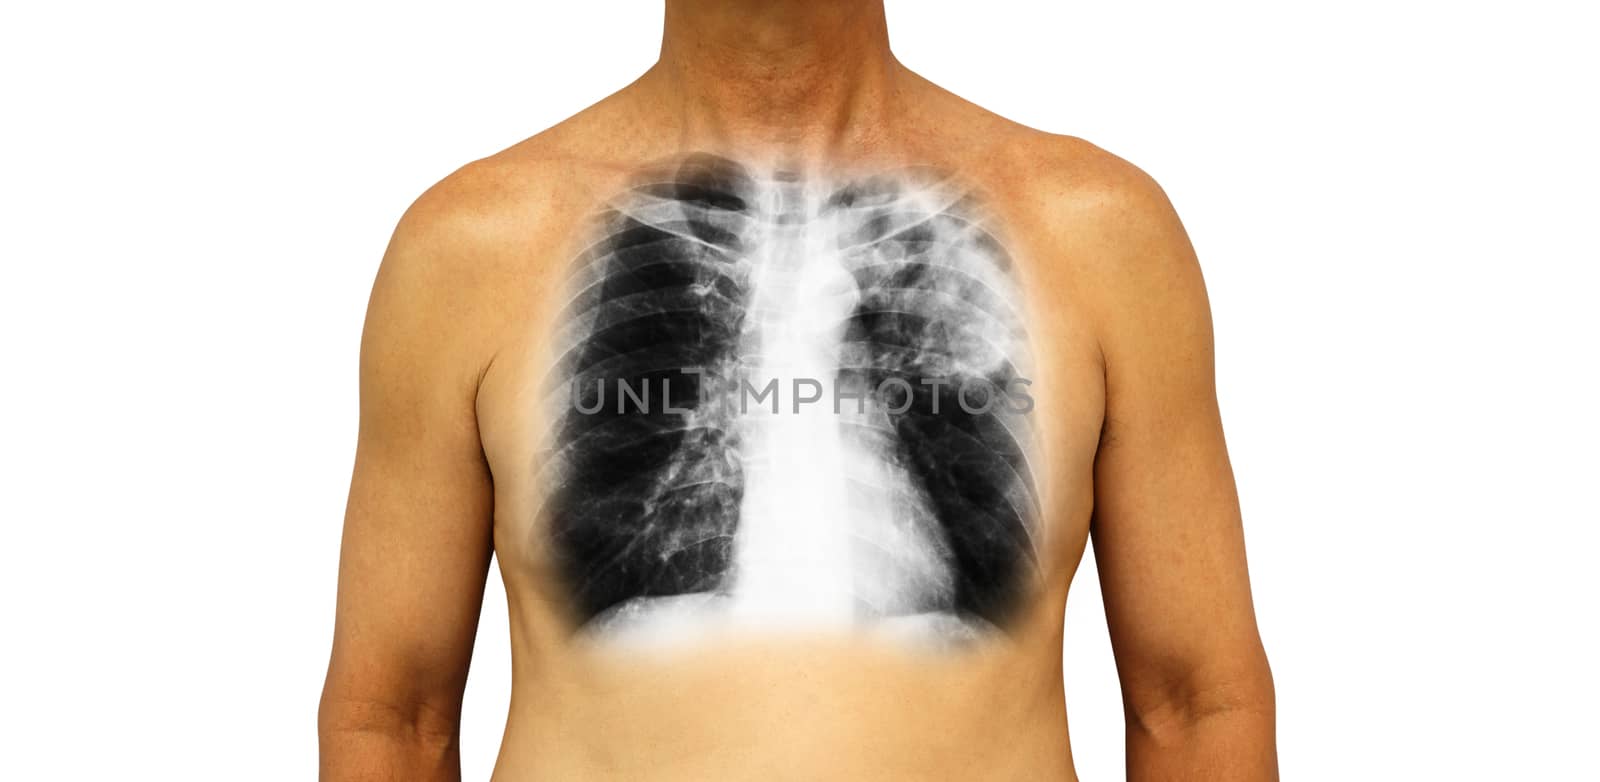 Pulmonary tuberculosis . Human chest with x-ray show patchy infiltrate left upper lung due to infection . Isolated background by stockdevil